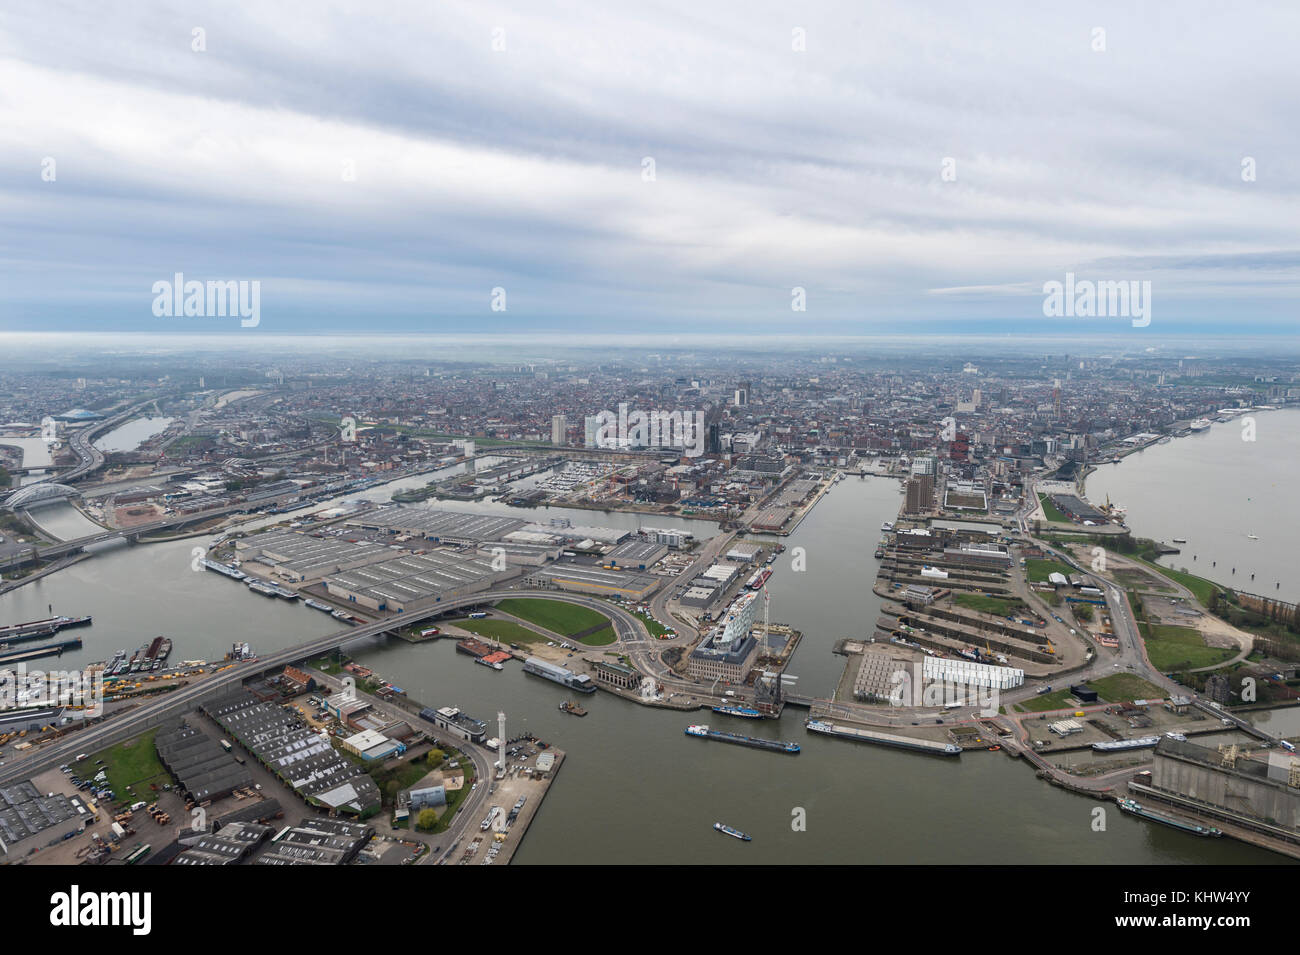 Aerial image looking from the Port of Antwerp to the city of Antwerp with the Nieuw Havenhuis en het Pomphuis in the foreground Stock Photo